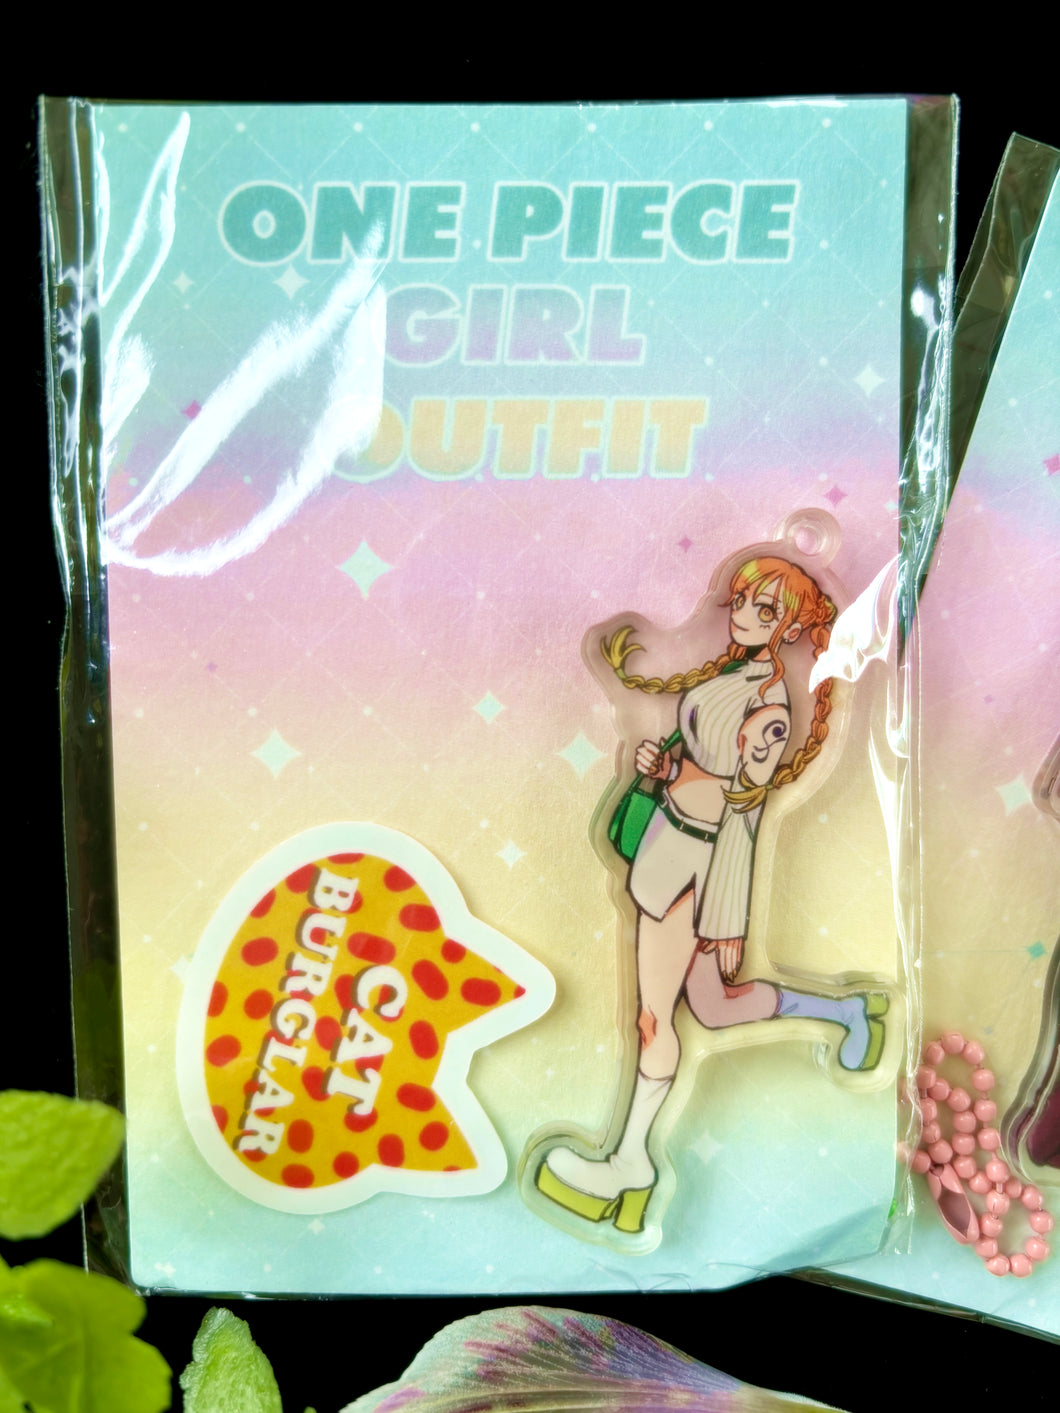 One Piece girl outfit- Nami